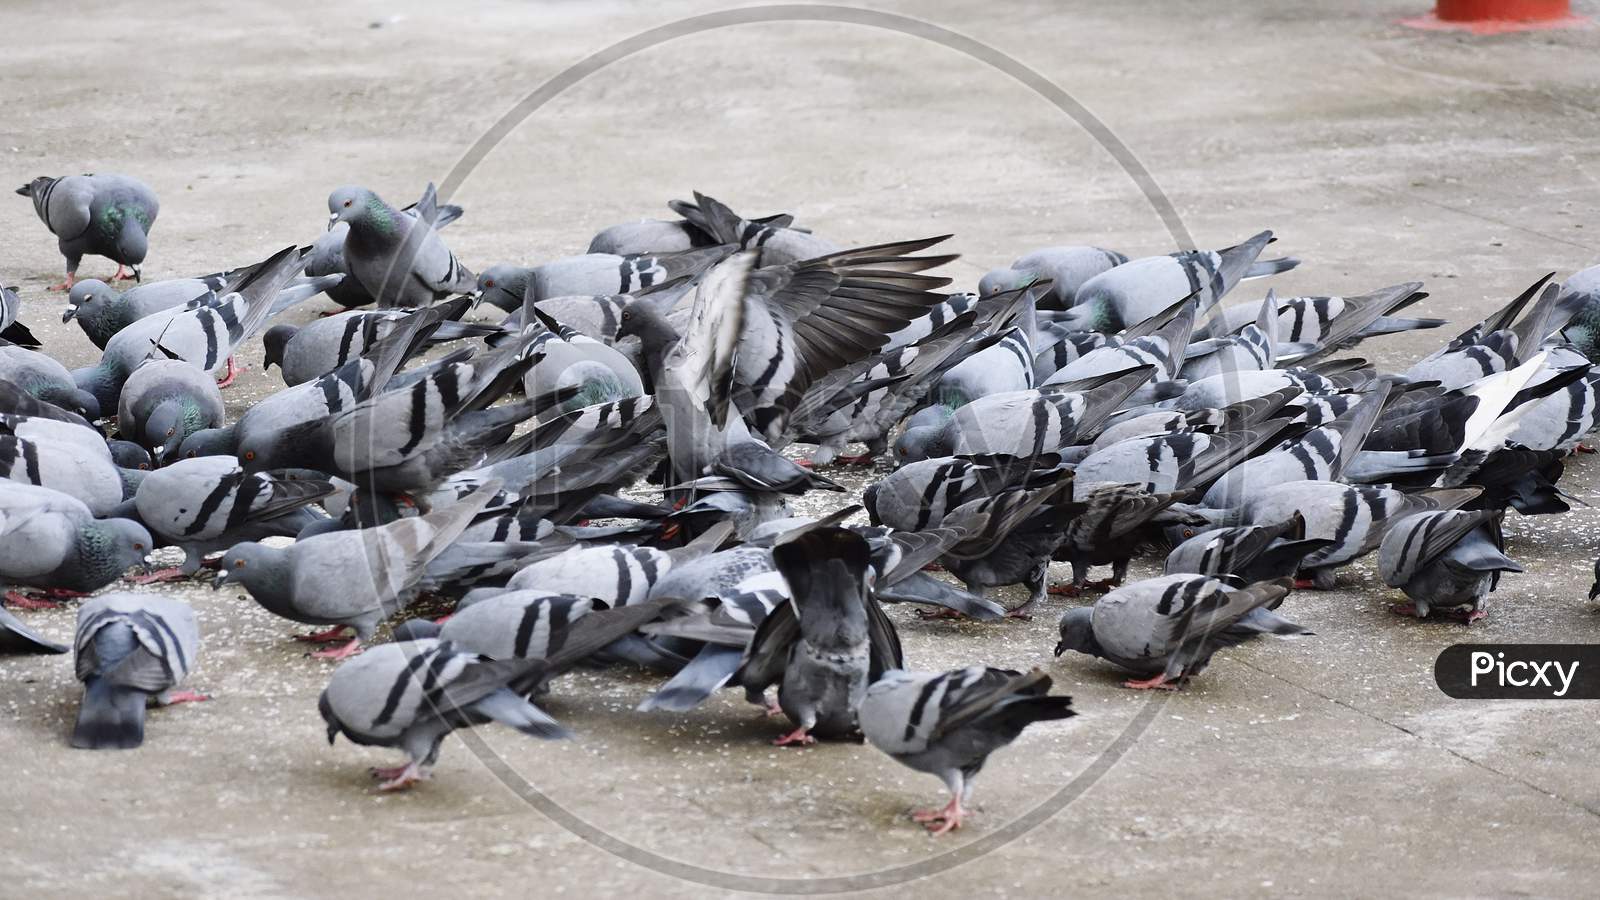 A Group Of Pigeons In My Ground